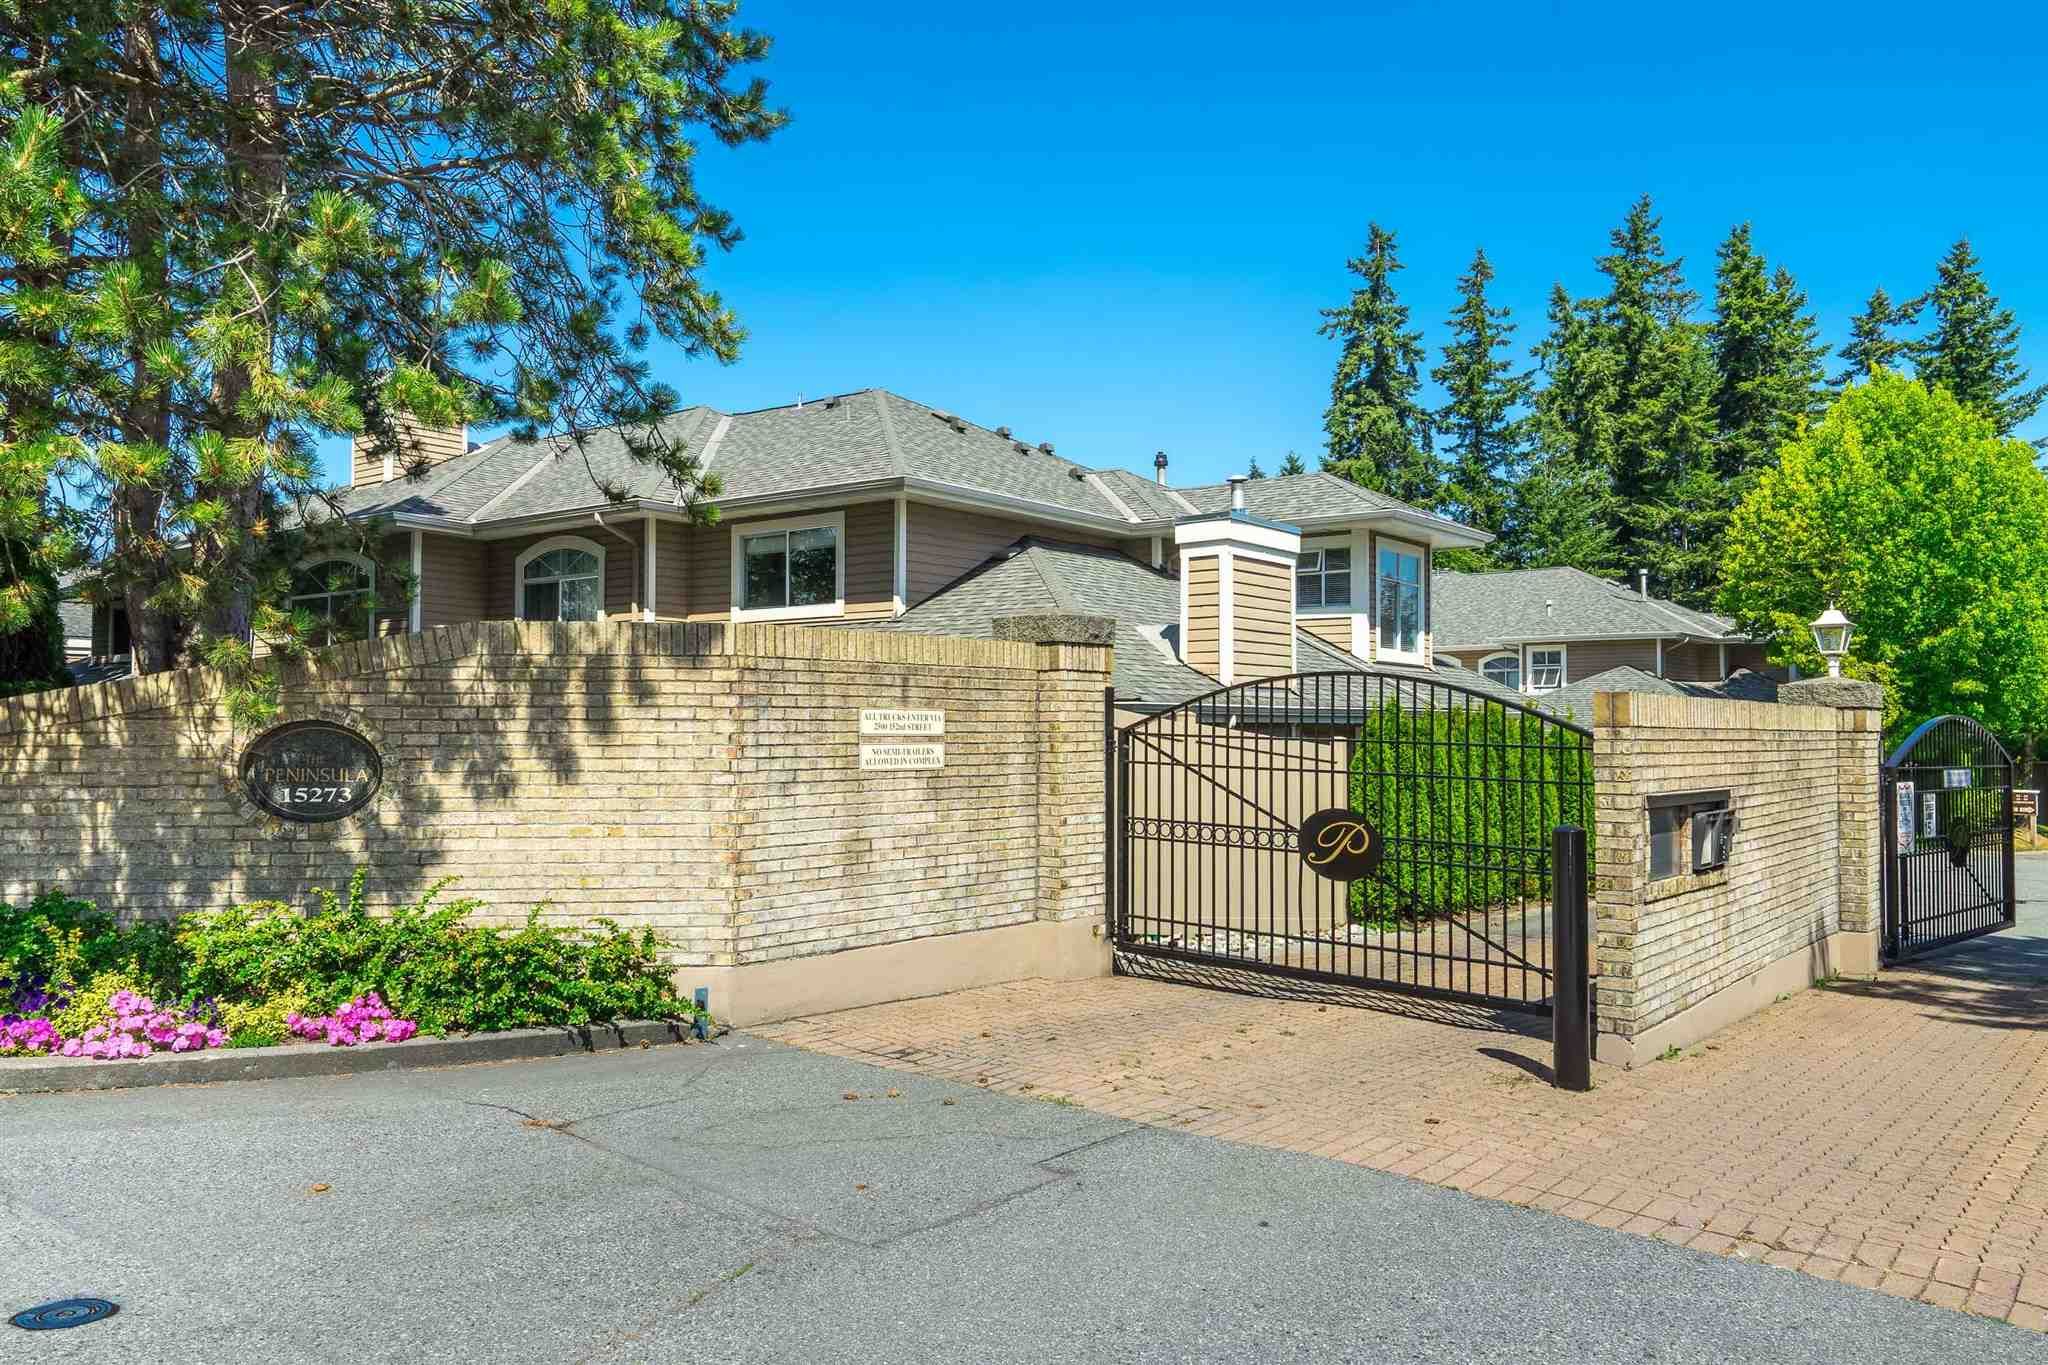 Main Photo: 38 15273 24 AVENUE in Surrey: King George Corridor Townhouse for sale (South Surrey White Rock)  : MLS®# R2604630